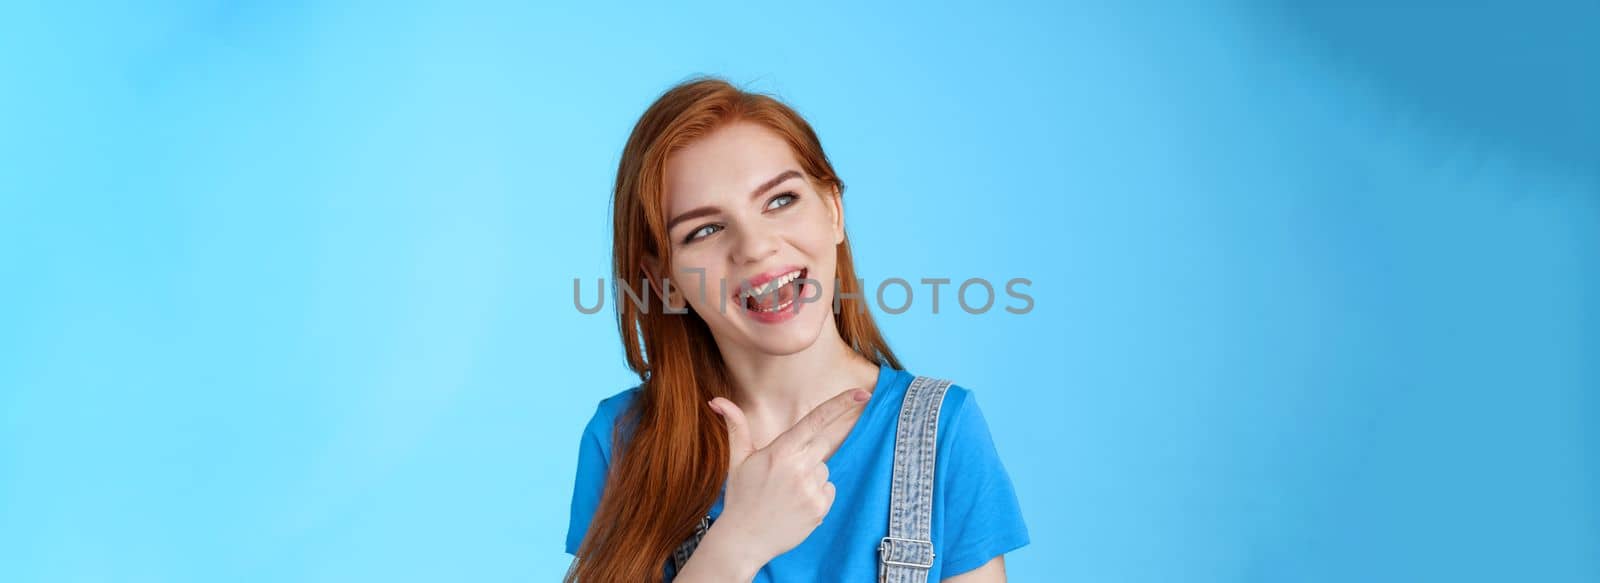 Sassy good-looking dreamy redhead female student contemplate cool performance, tilt head joyfully pointing look left, discuss holiday plans, curiously asking question, posing blue background.